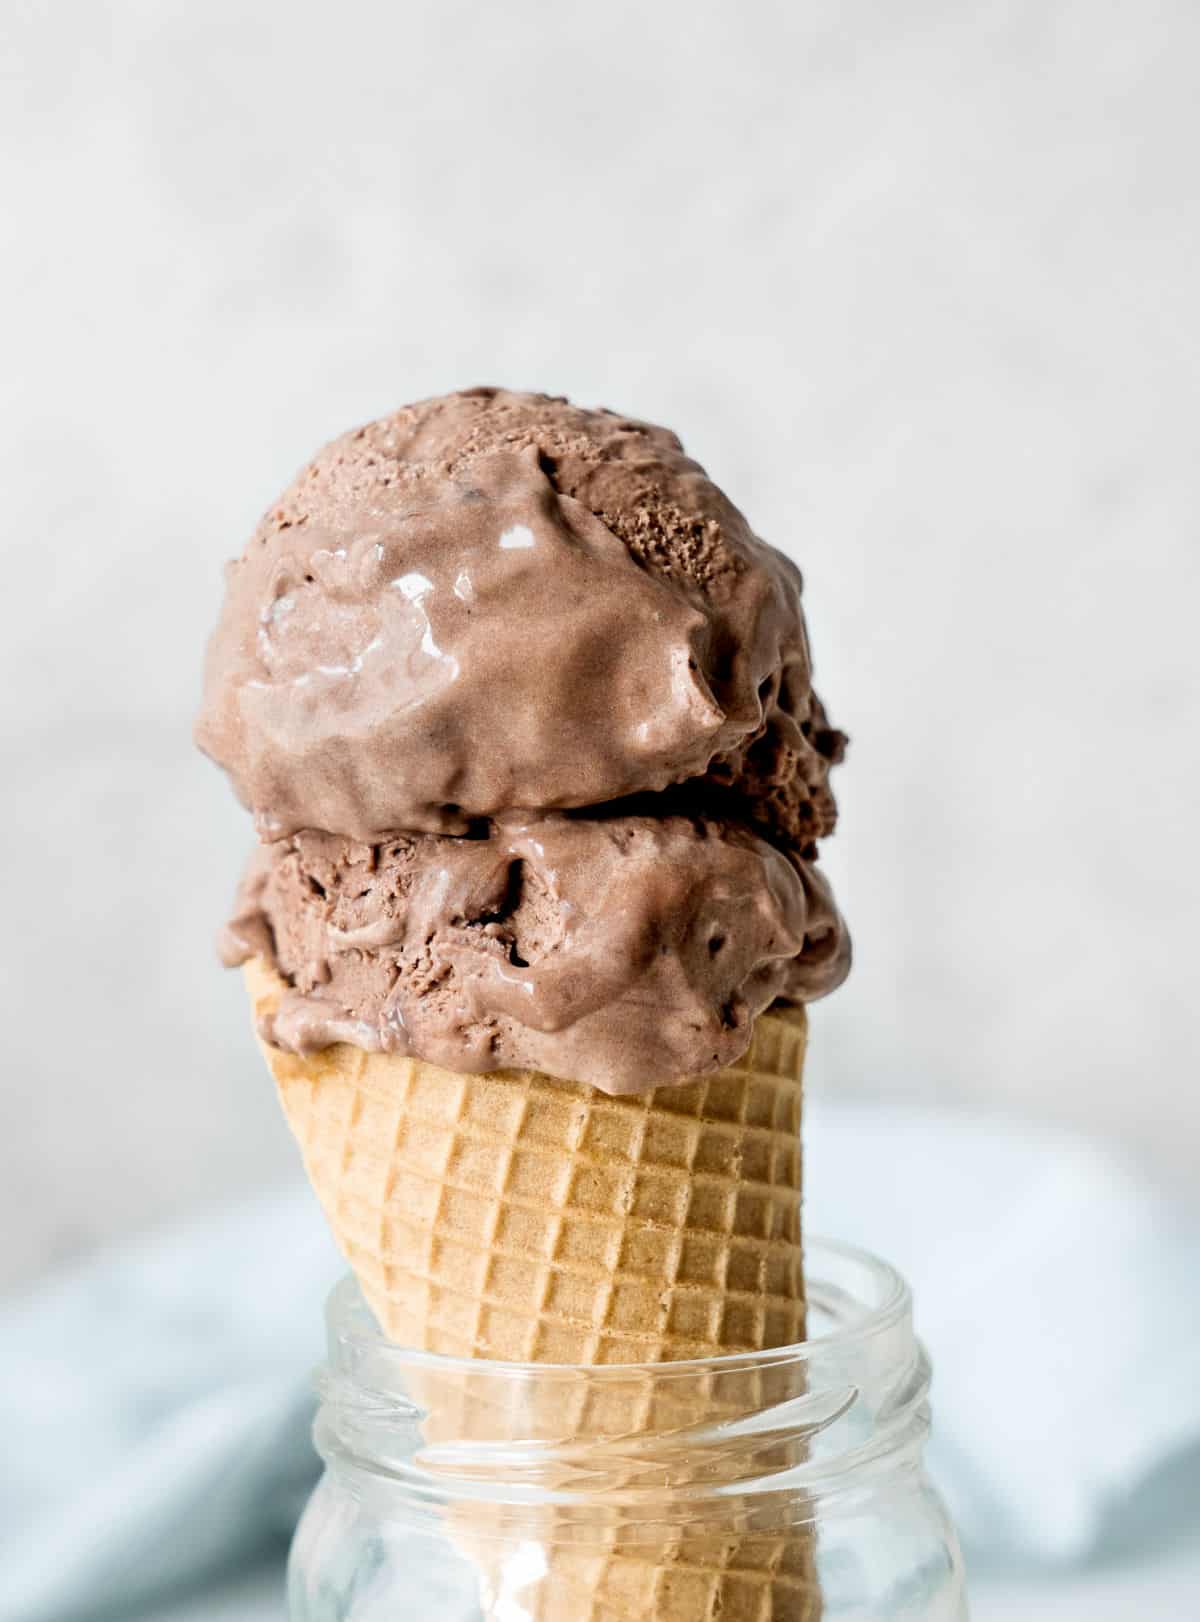 Waffle cone with two scoops of chocolate ice cream. Light grey and light blue background. 